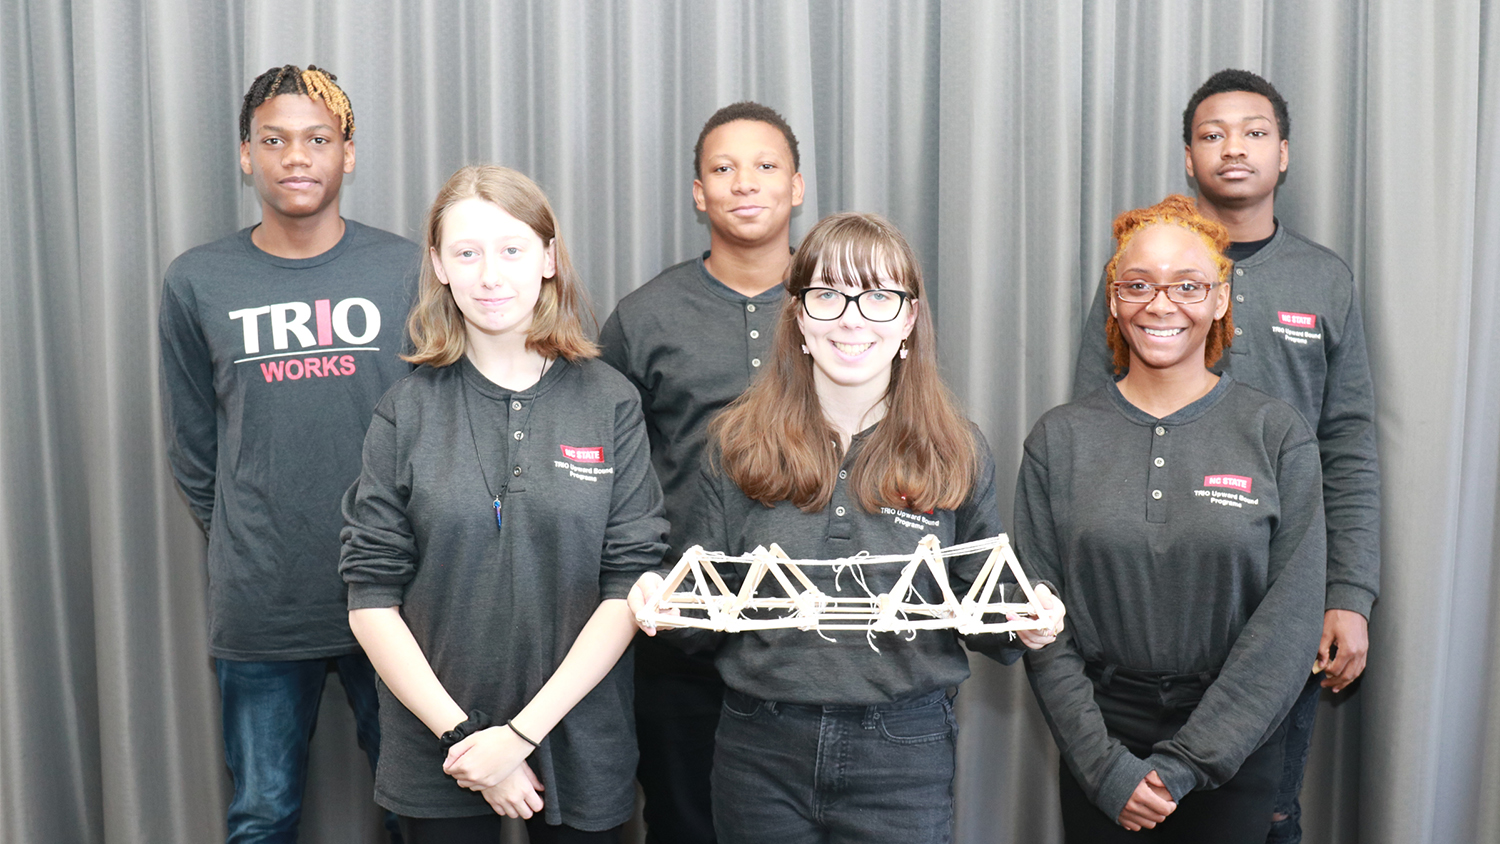 A group of students in grey TRIO T-shirts, with the student in front holding the bridge they built